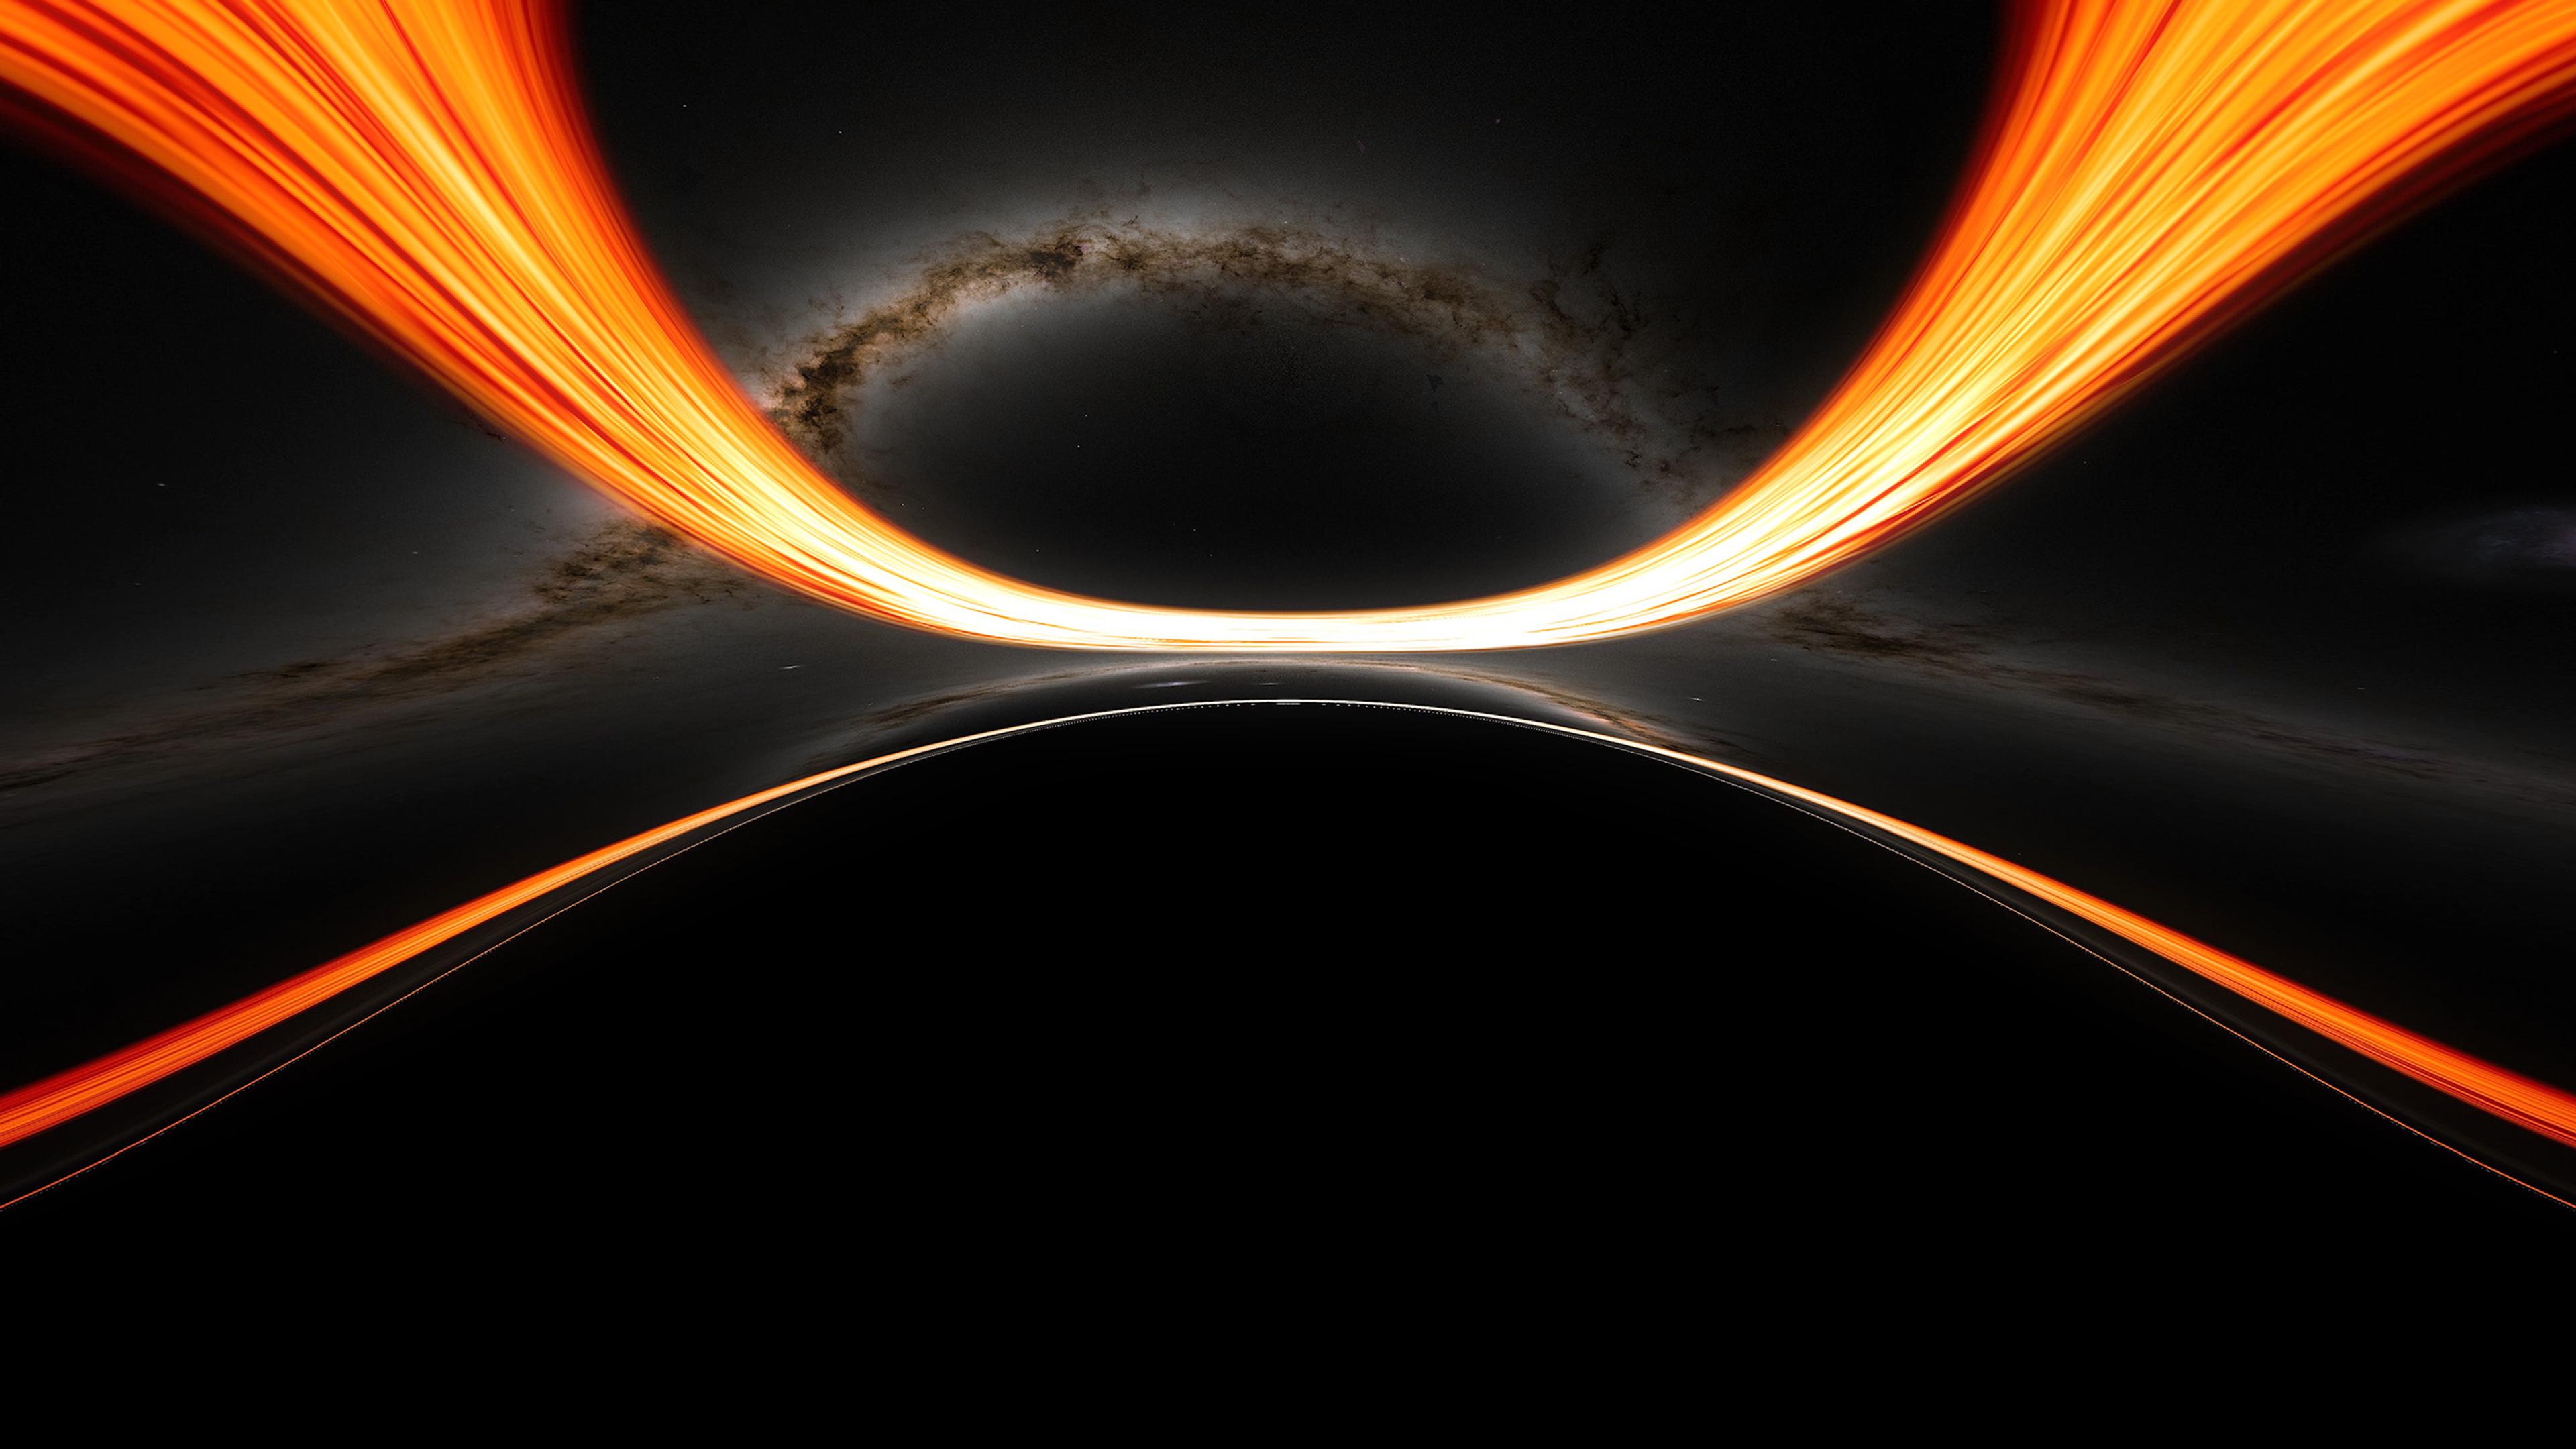 Artistic depiction of a black hole with light bending around its event horizon. A bright orange and yellow swirl of light contrasts against the deep black and dark grey background, illustrating the gravitational pull and bending of light.